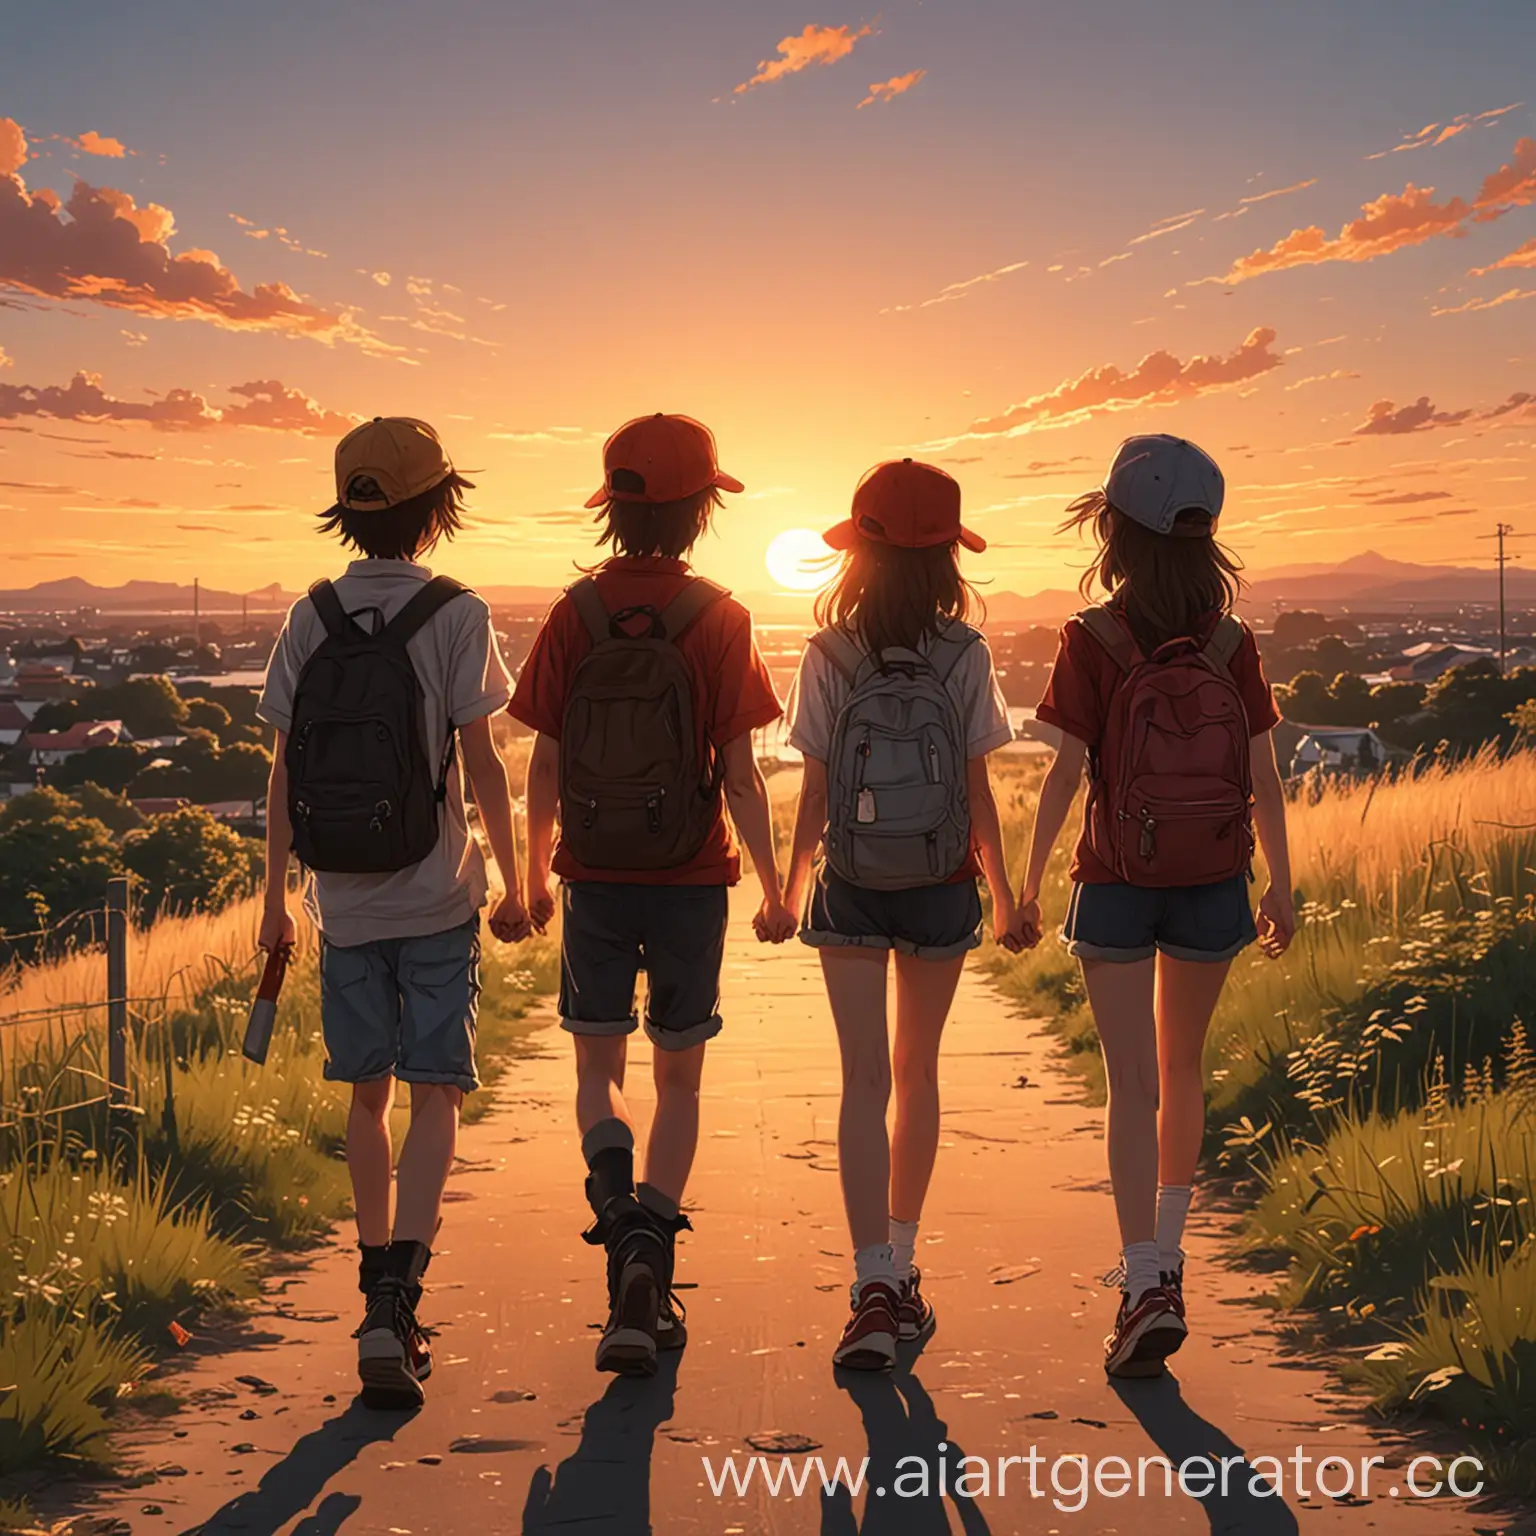 A group of friends,boys and two girls, they are wearing caps, walking with their backs to the sunset, anime style
